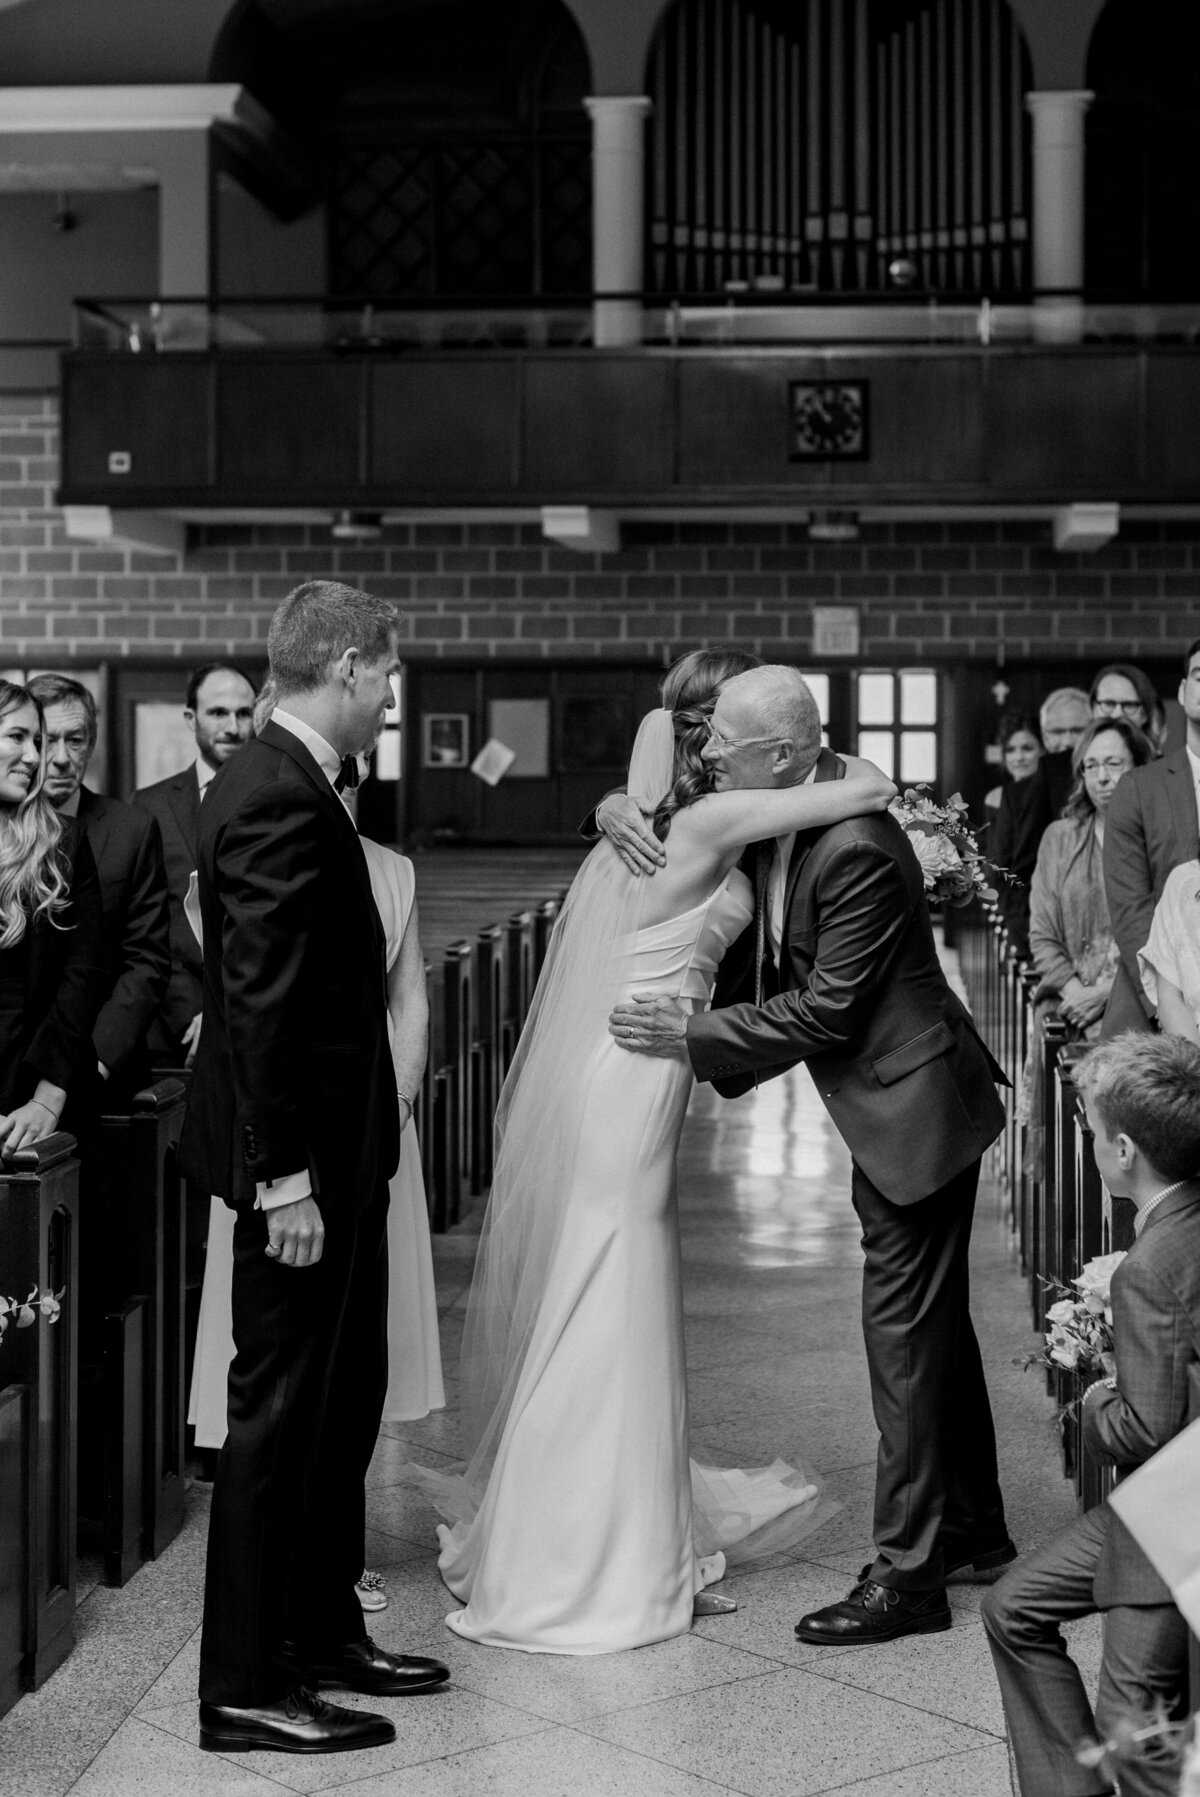 Bride hugging father as he gives her away at Halifax wedding